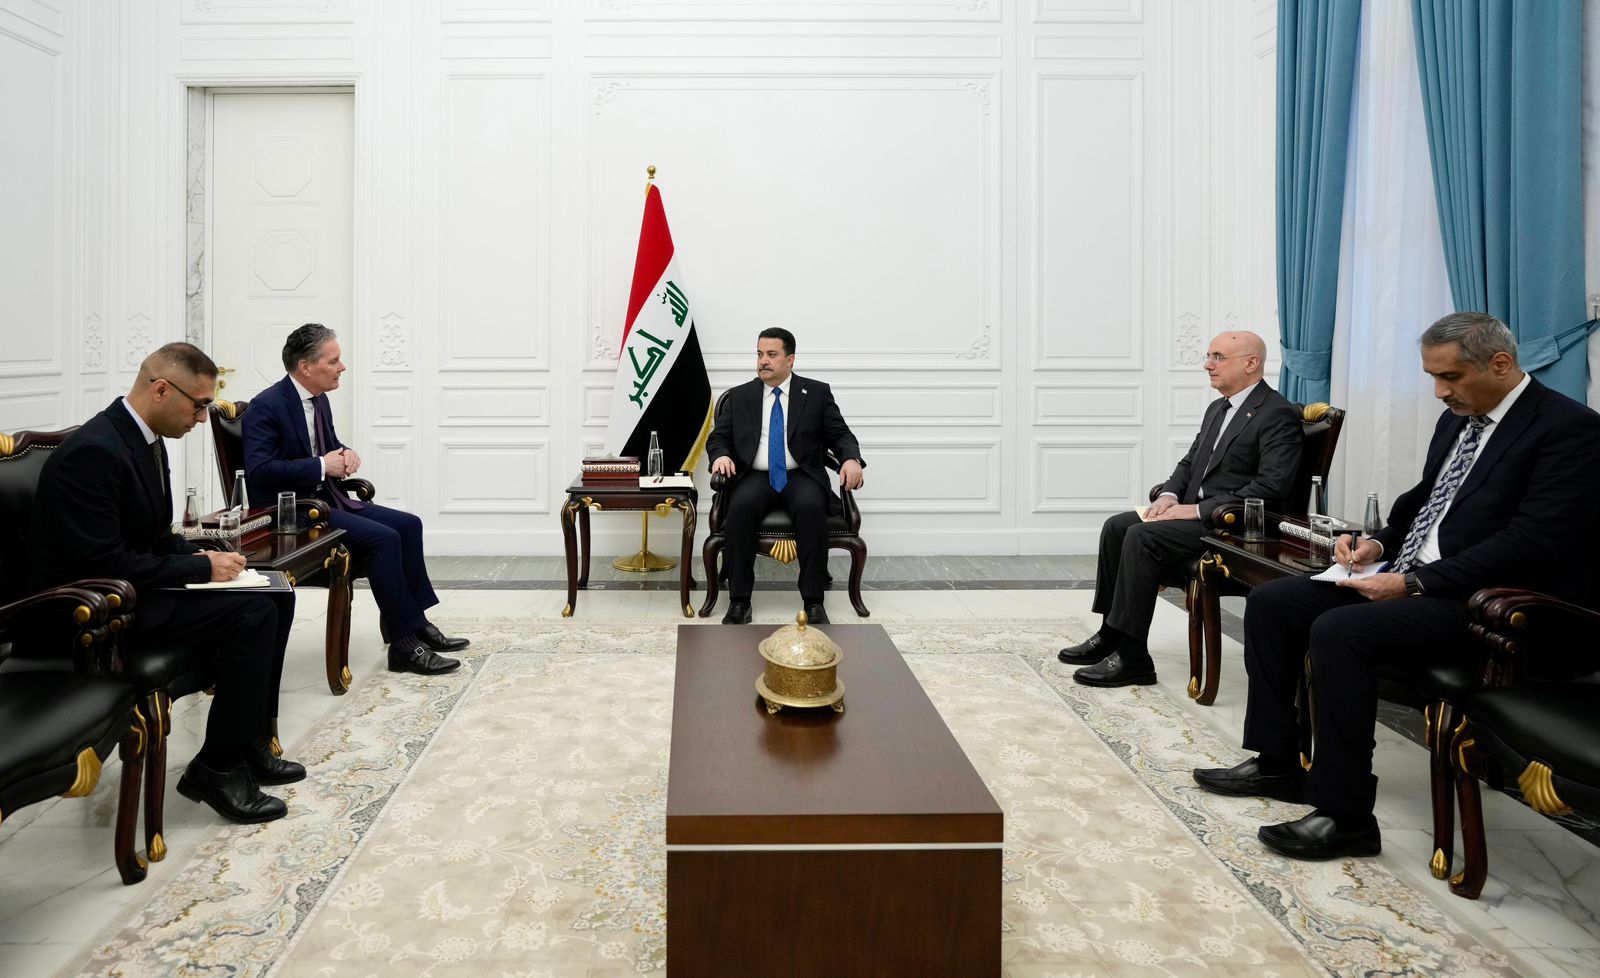 The Netherlands expresses desire to work with Iraq on development projects